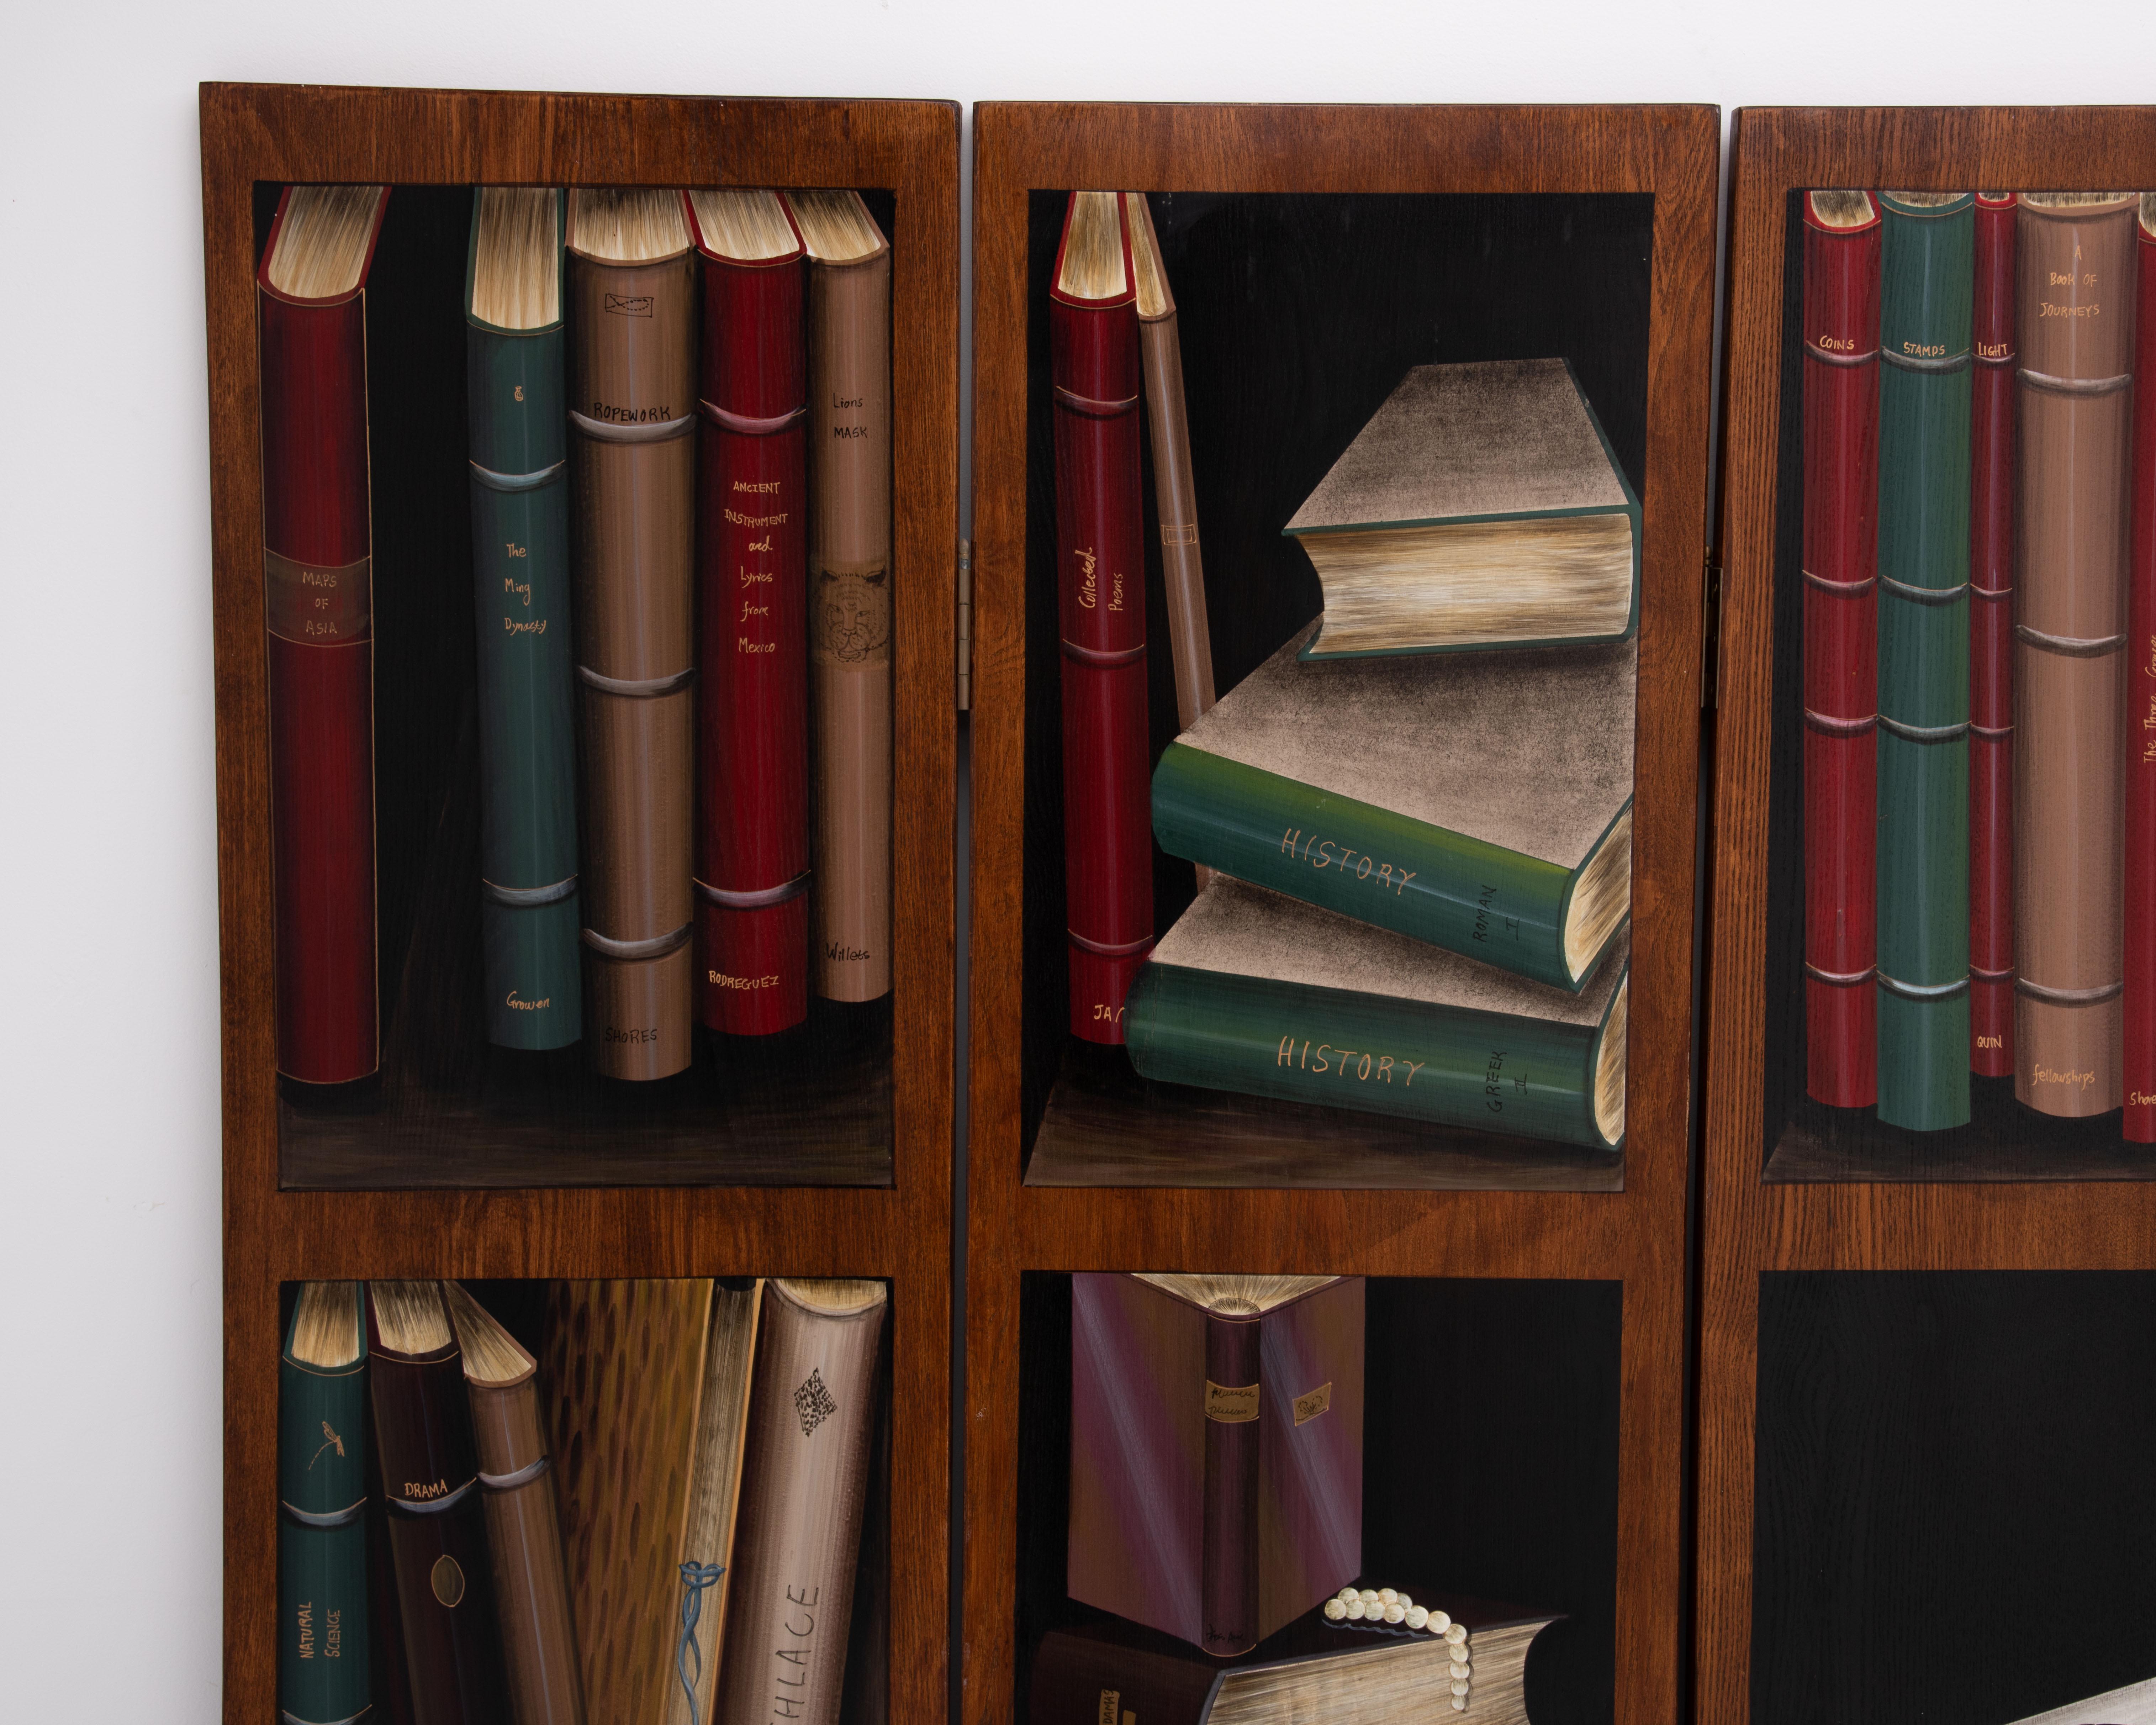 A Trompe L''Oeil style room divider depicting painted vintage library and book vignettes on a single side of one inch deep wood panels. The backside is undecorated. It measures 72